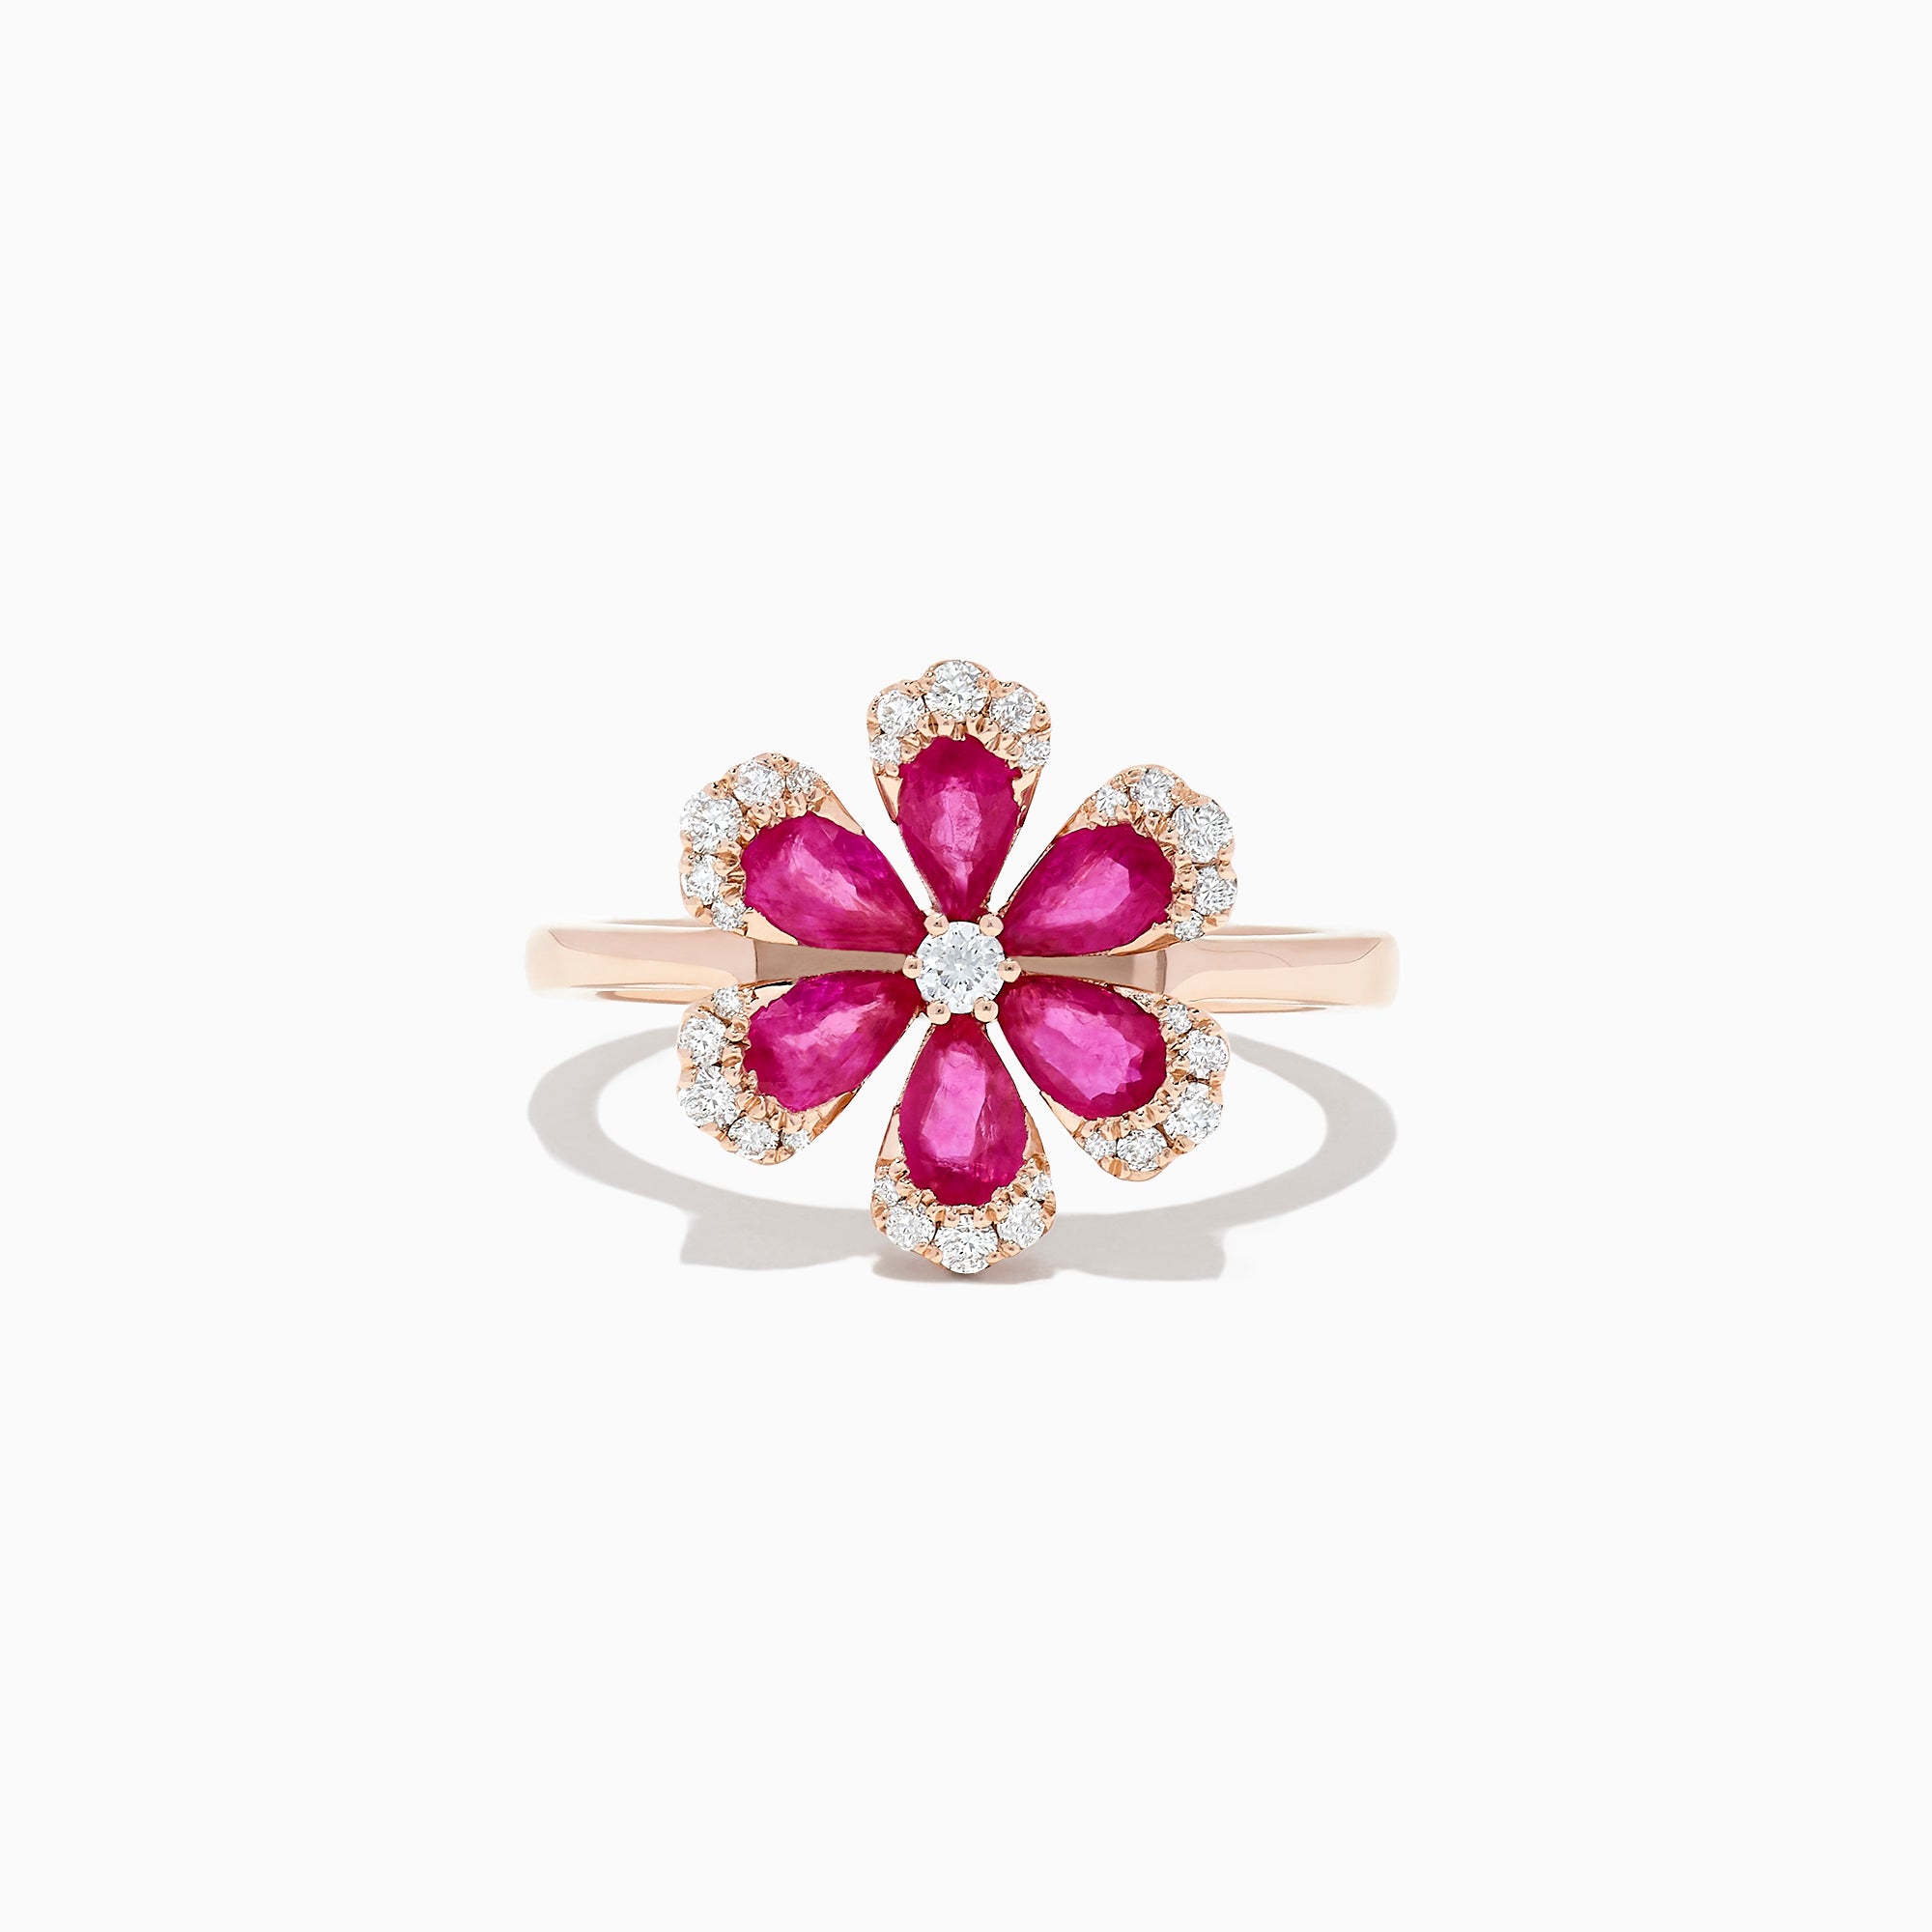 Effy Nature 14K Rose Gold Ruby and Diamond Flower Ring, 1.76 TCW